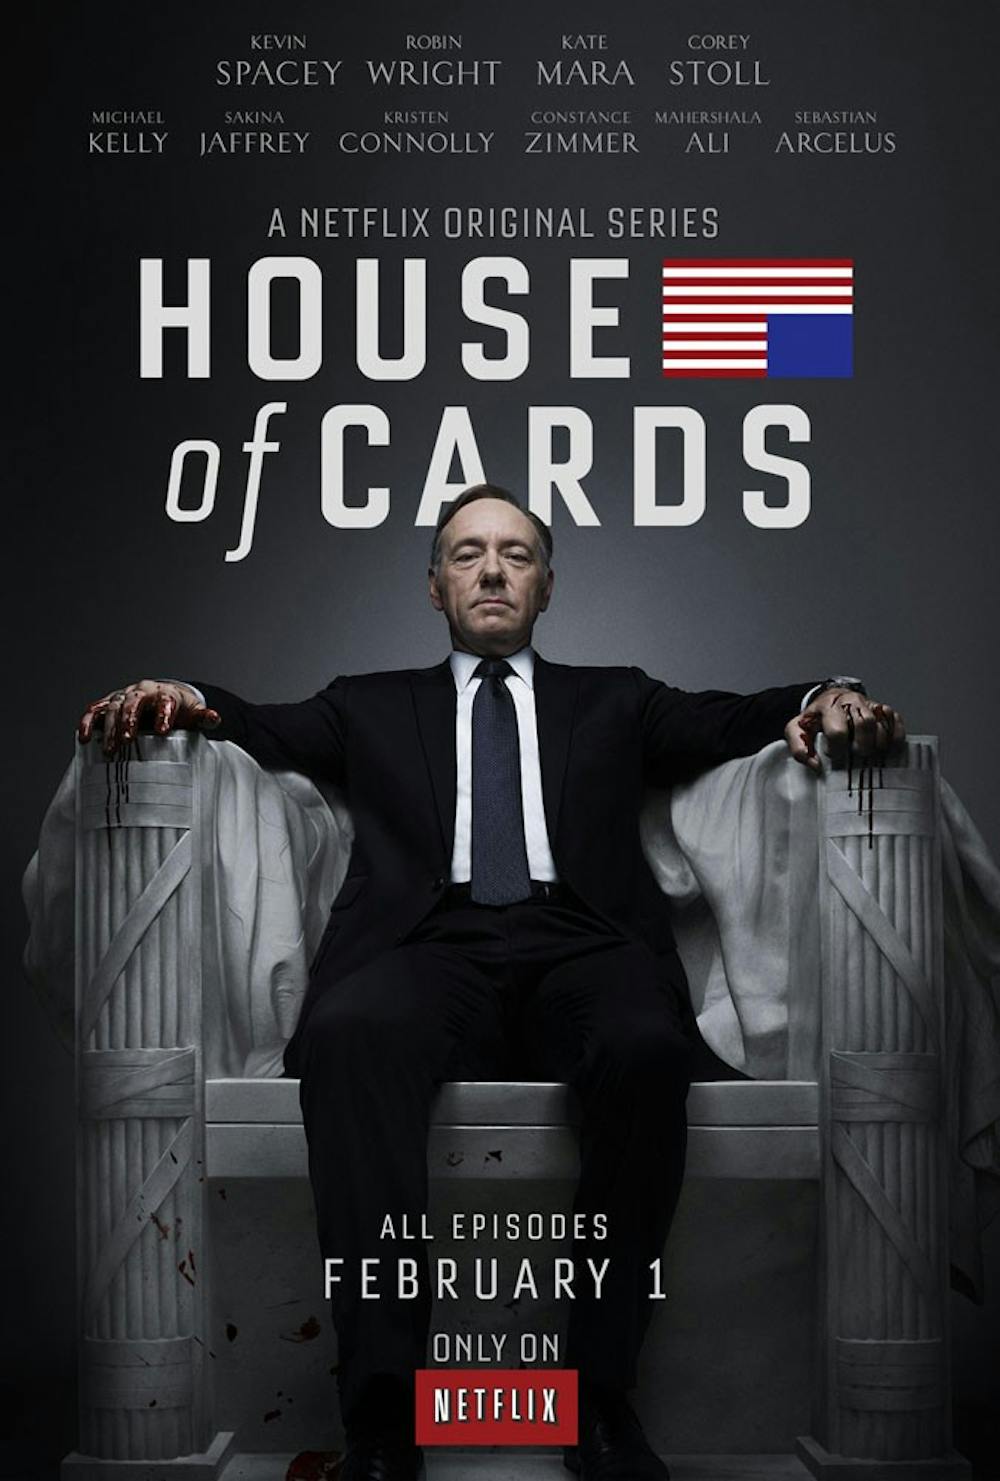 <p>The latest installment of House of Cards provides viewers with a similar experience to the first season - ruthless drama complemented by alliances, political motivations and of course, backstabbing.</p>